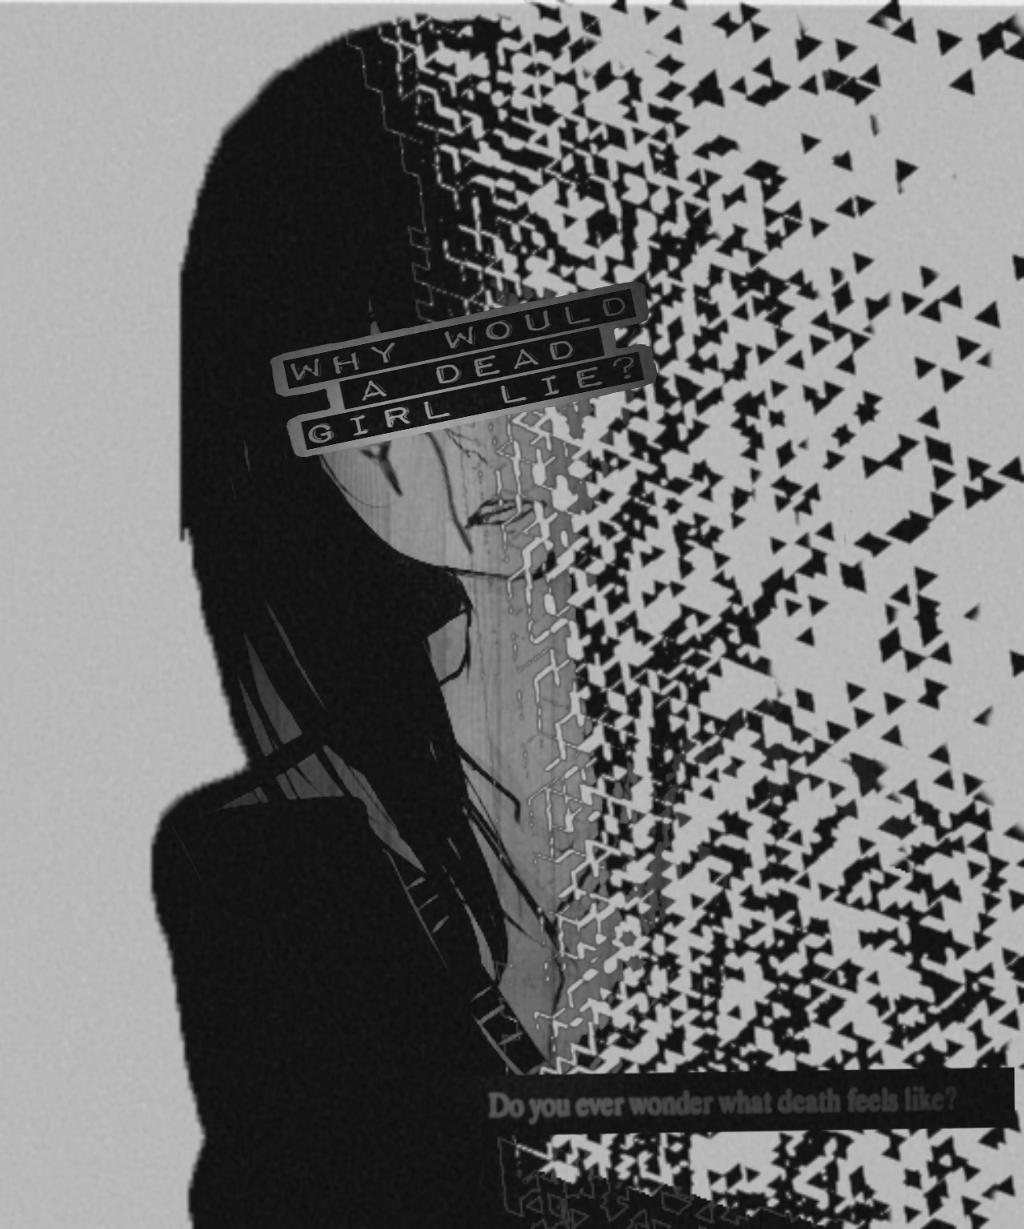 Depressed Anime iPhone Wallpapers -Top 25 Best Depressed Anime iPhone  Wallpapers - Getty Wallpapers